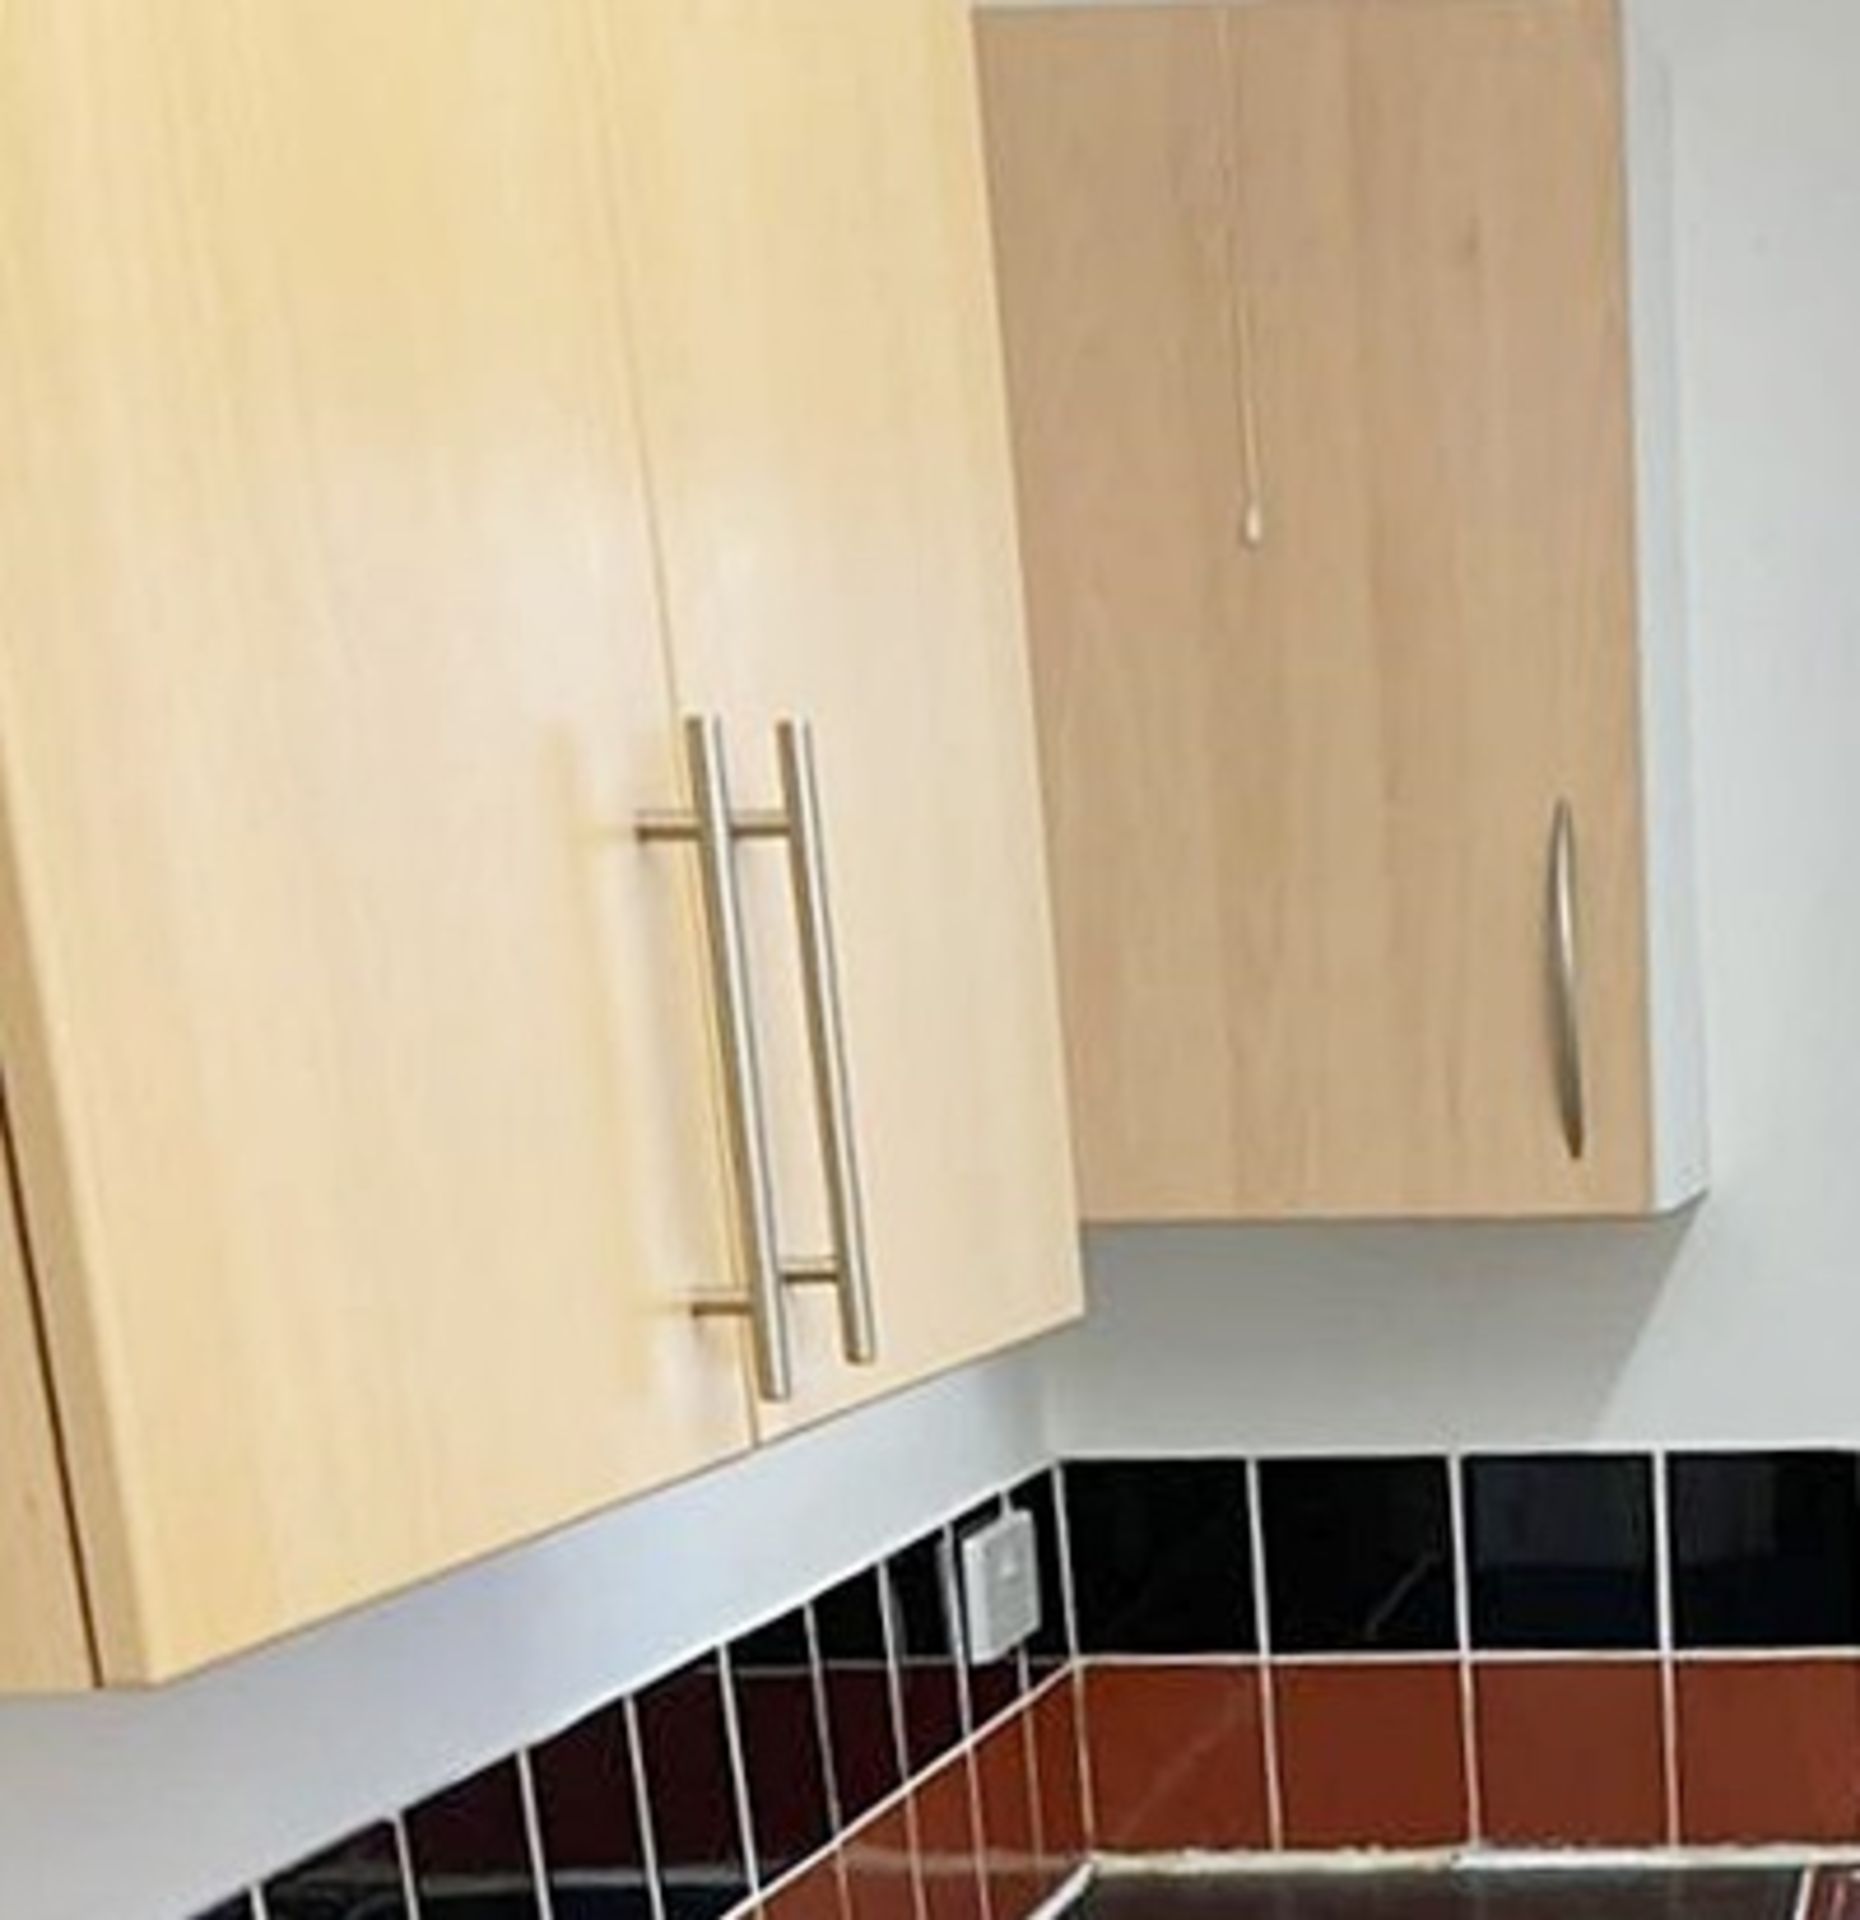 Contents Of 2 x Staff Kitchens Consisting Of Cabinets And Laminate Worktops - From An Executive - Image 3 of 6